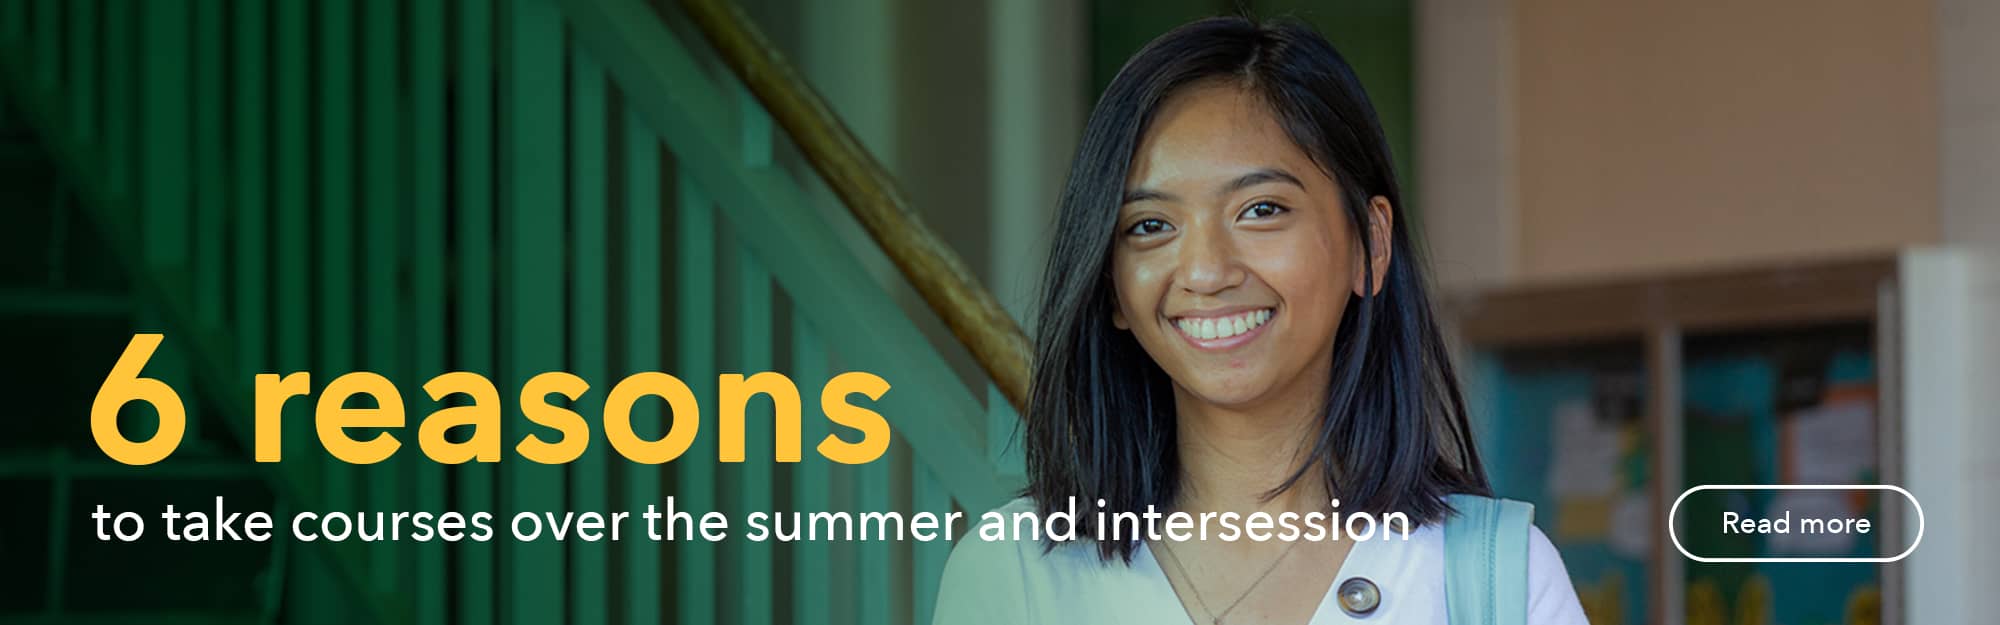 6 reasons to take courses over the summer and intersession